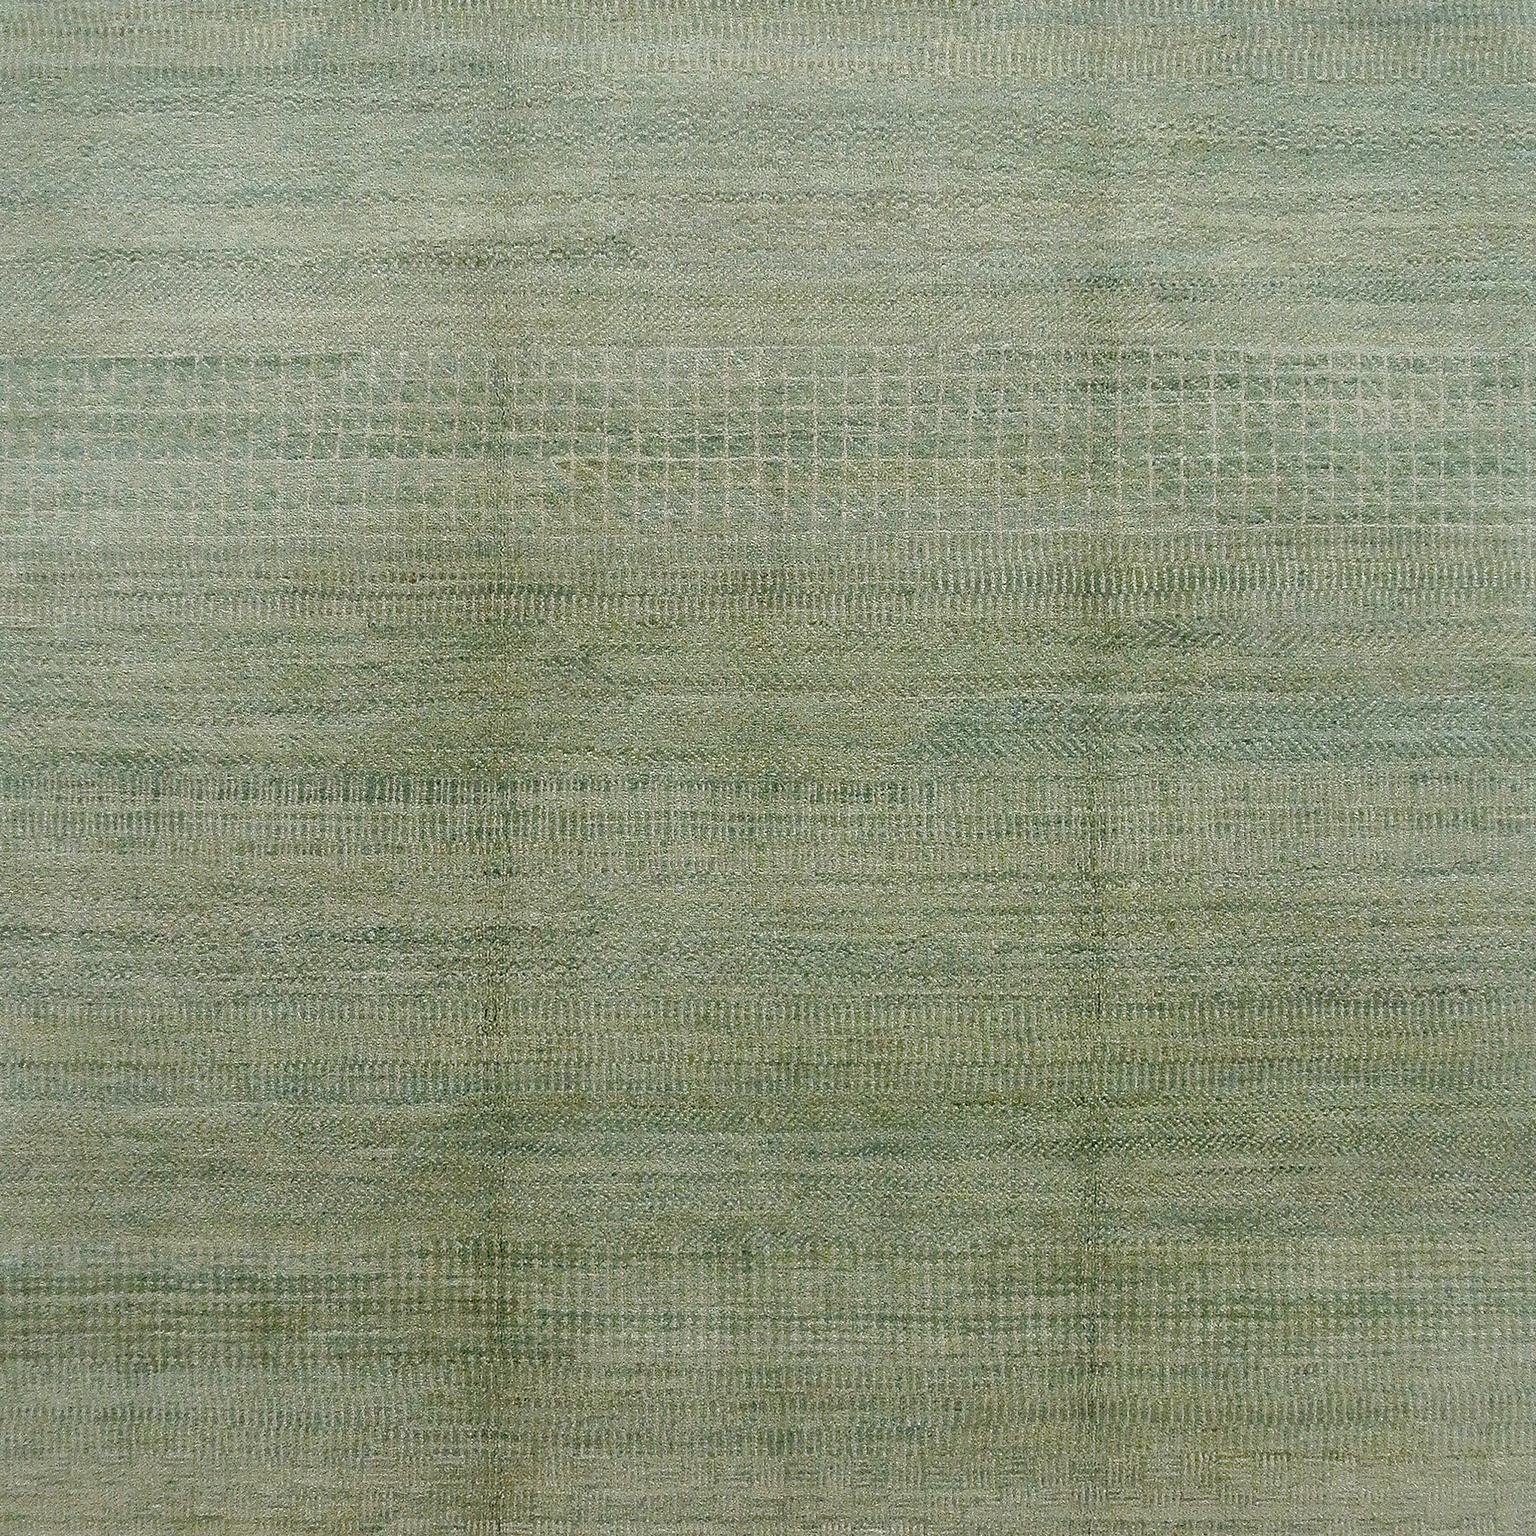 This Orley Shabahang signature “Rain No. 1” carpet in pure handspun wool and organic dyes showcases a modern design in a hand knotted Persian weave. This carpet features a simple pattern that symbolizes all the shapes that rain can take in a